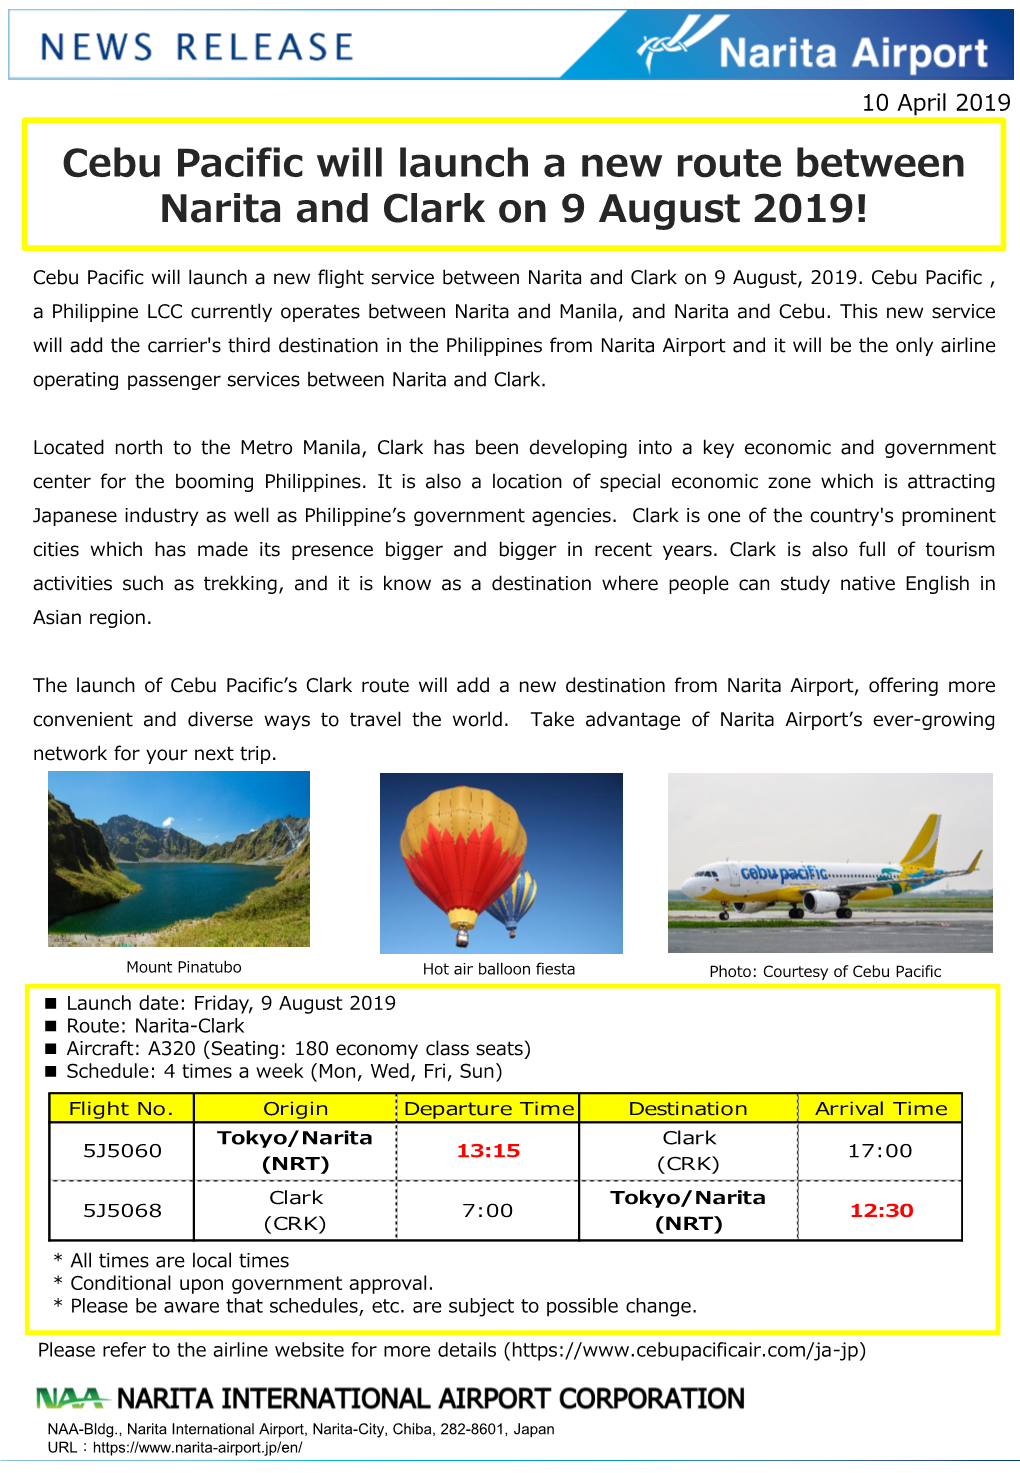 Cebu Pacific Will Launch a New Route Between Narita and Clark on 9 August 2019!